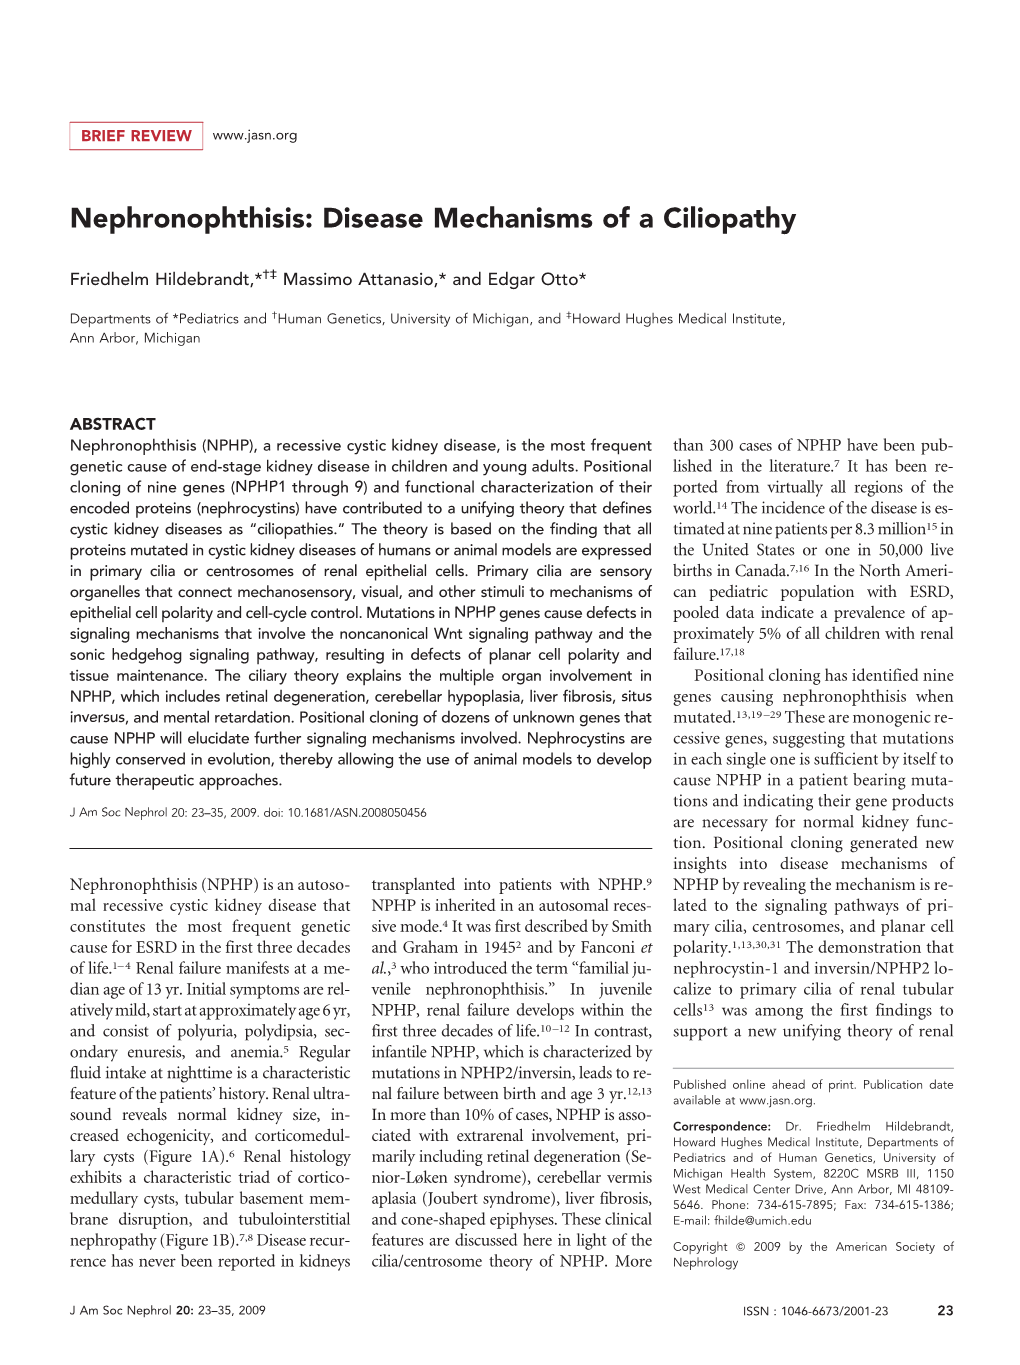 Nephronophthisis: Disease Mechanisms of a Ciliopathy